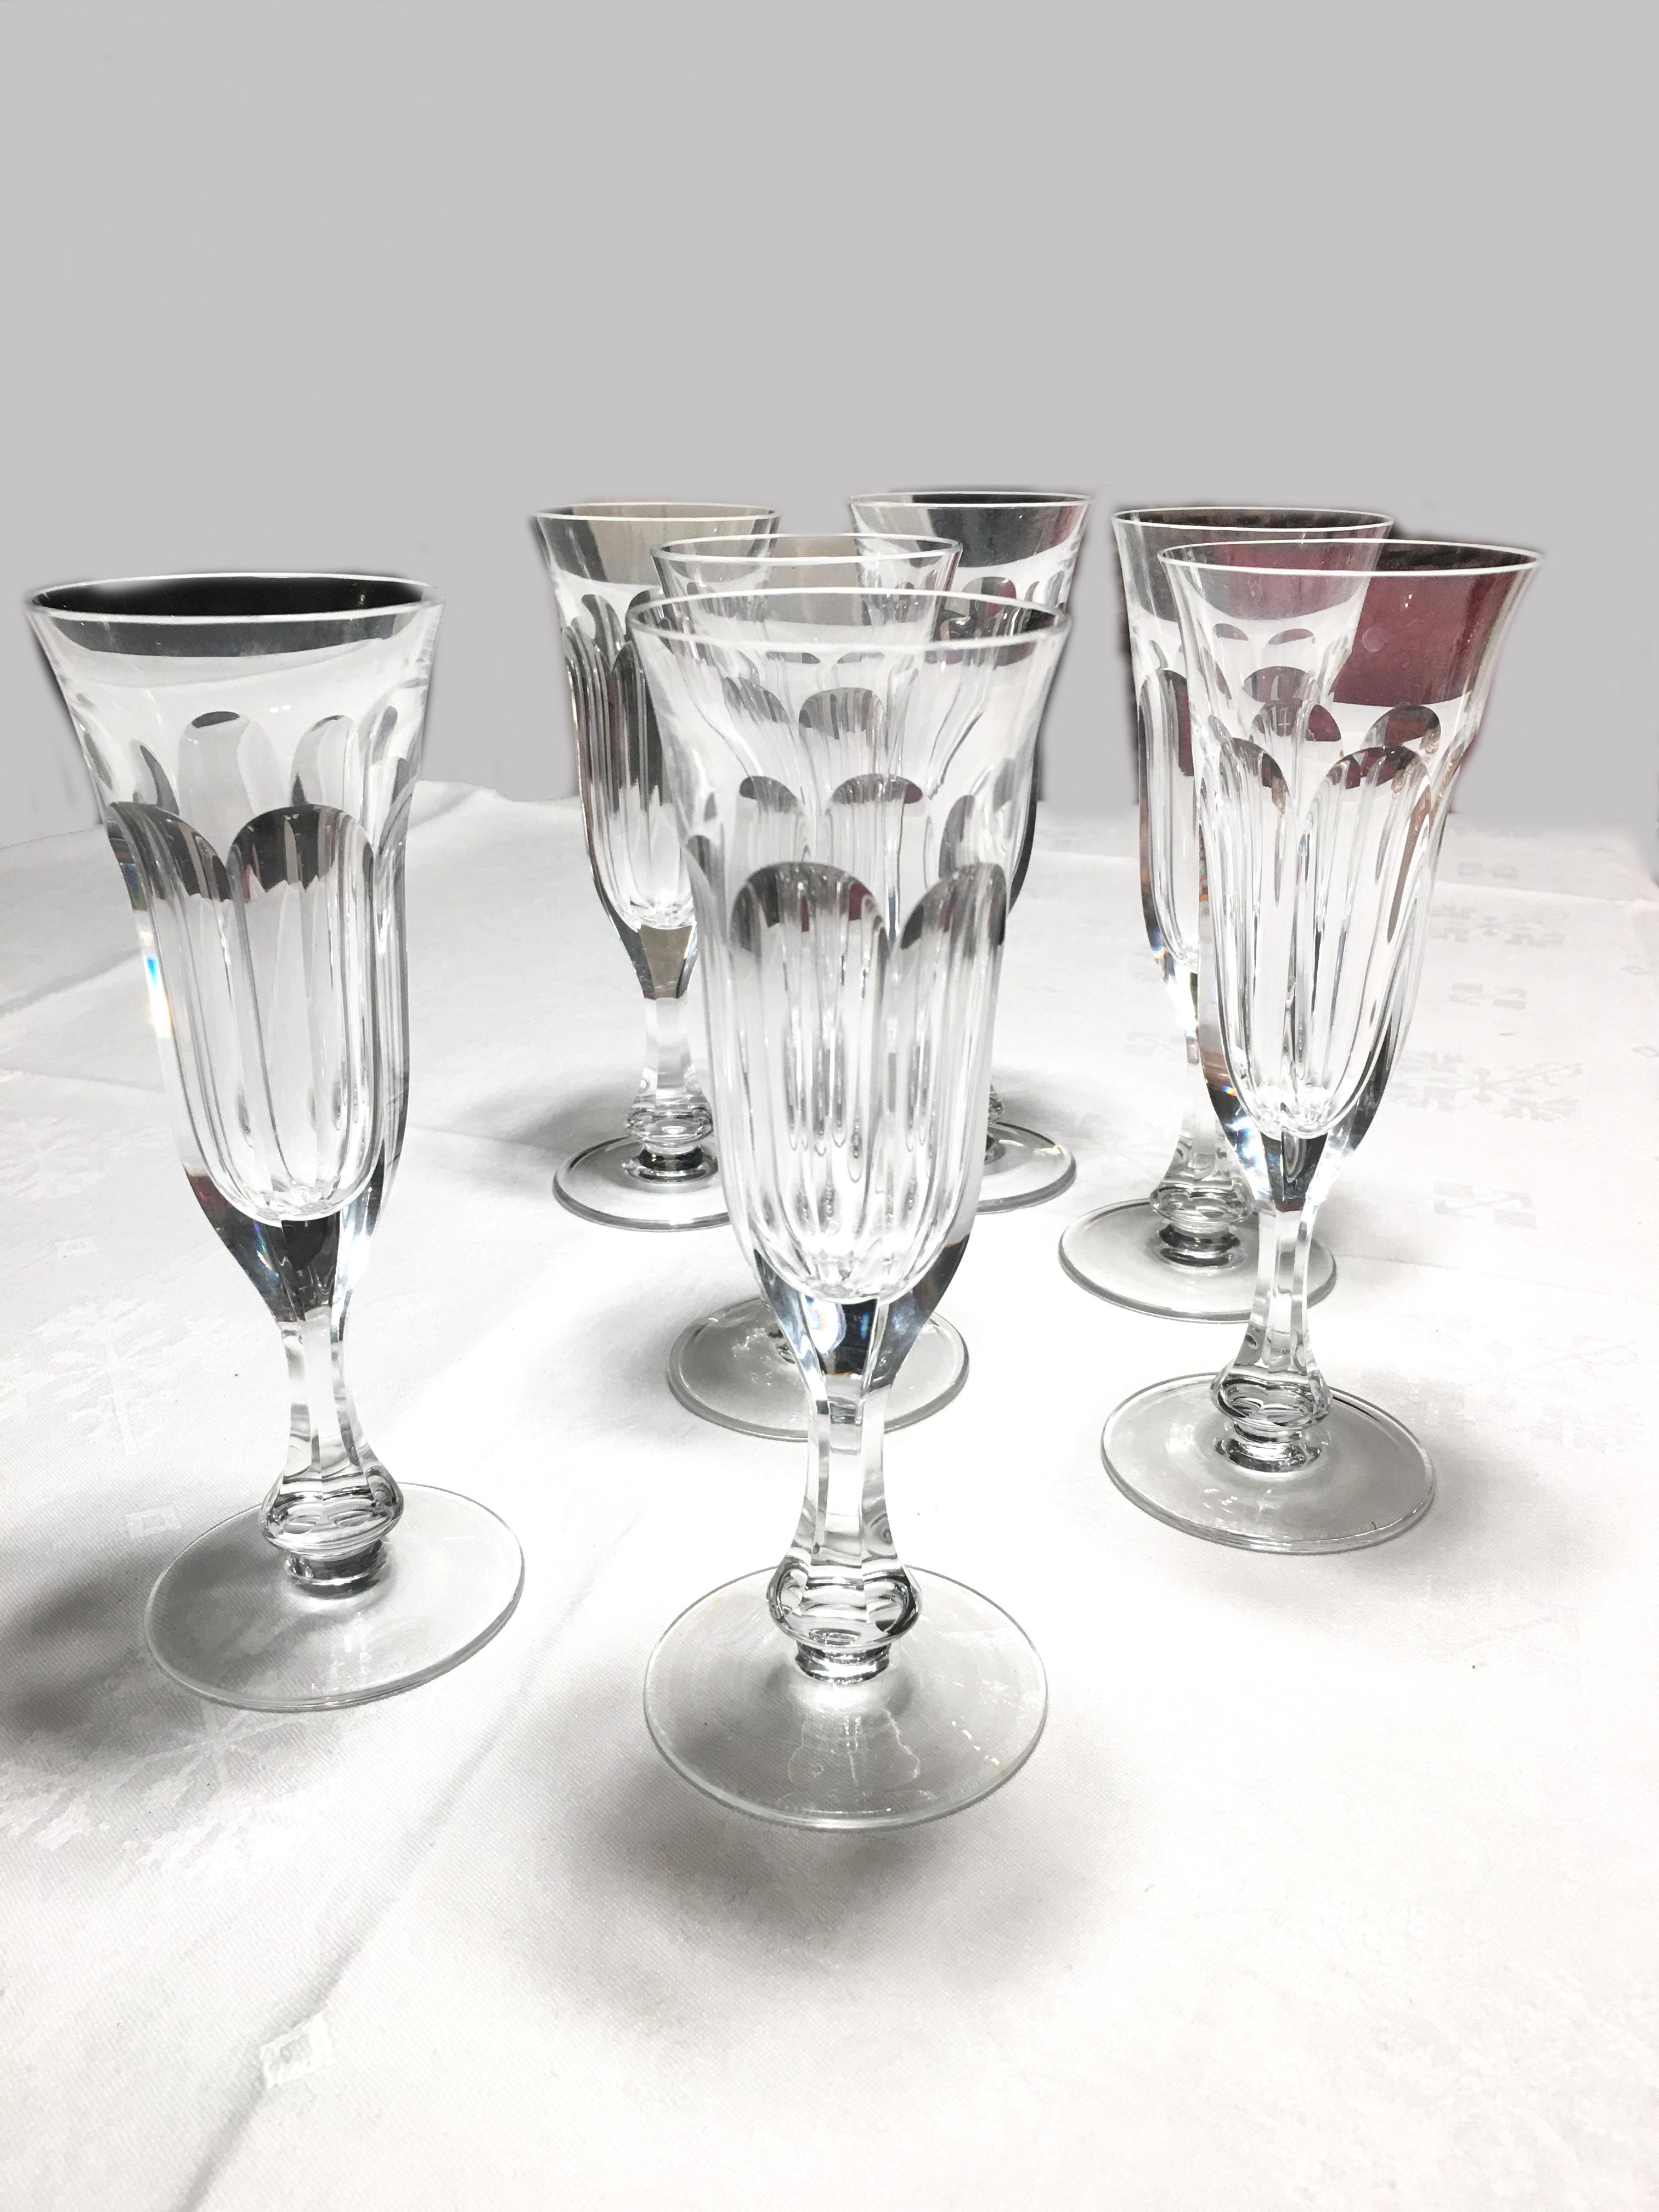 These are 8 champagne glasses made from hand blown crystal by Moser in the ever popular Lady Hamilton glass cut.

This pattern is an example of the 